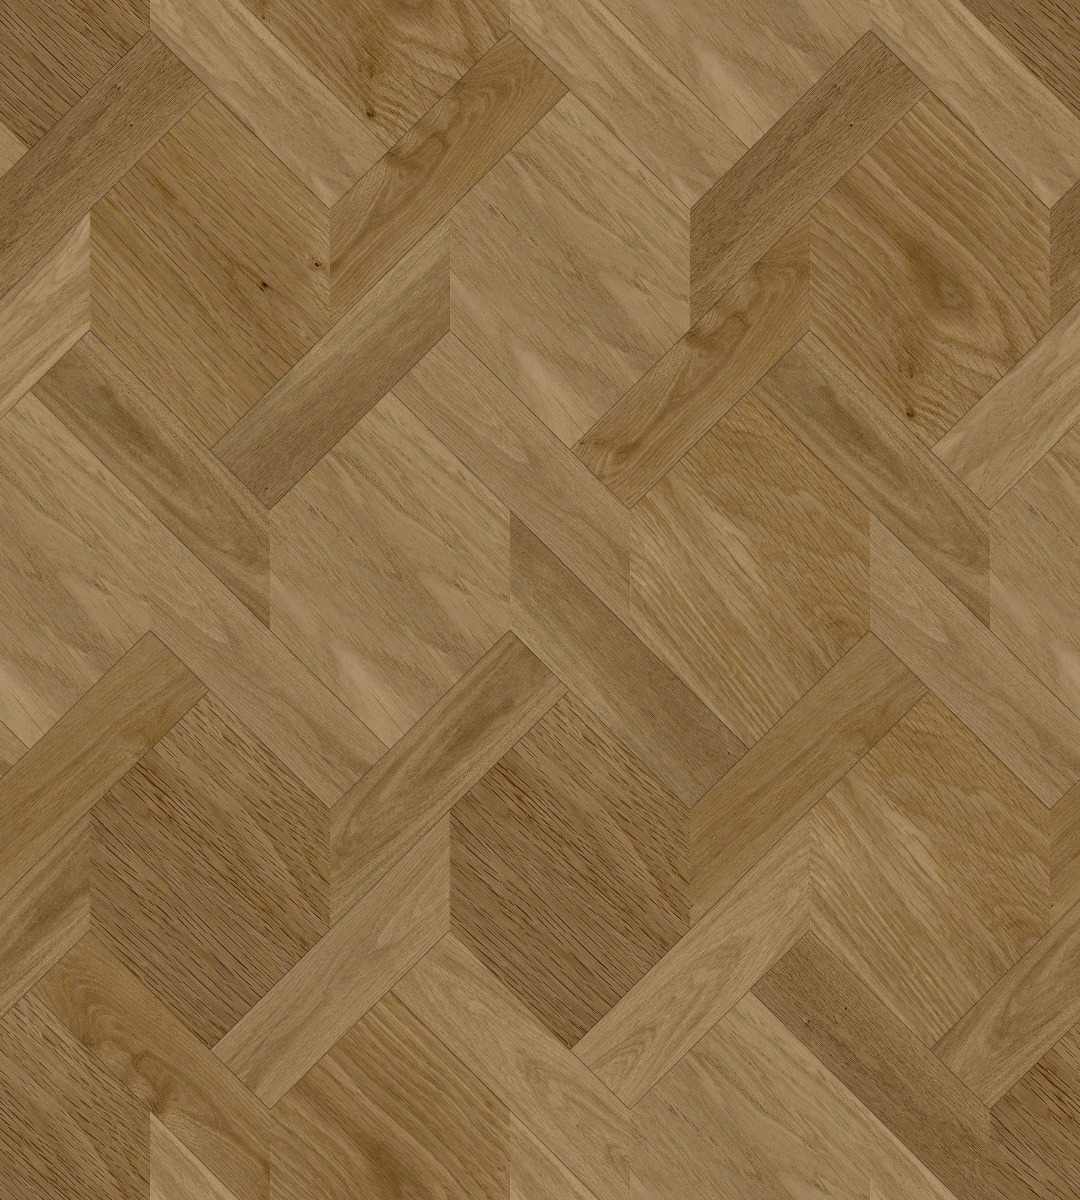 A seamless wood texture with expressive 152 boards arranged in a Mansion Weave pattern